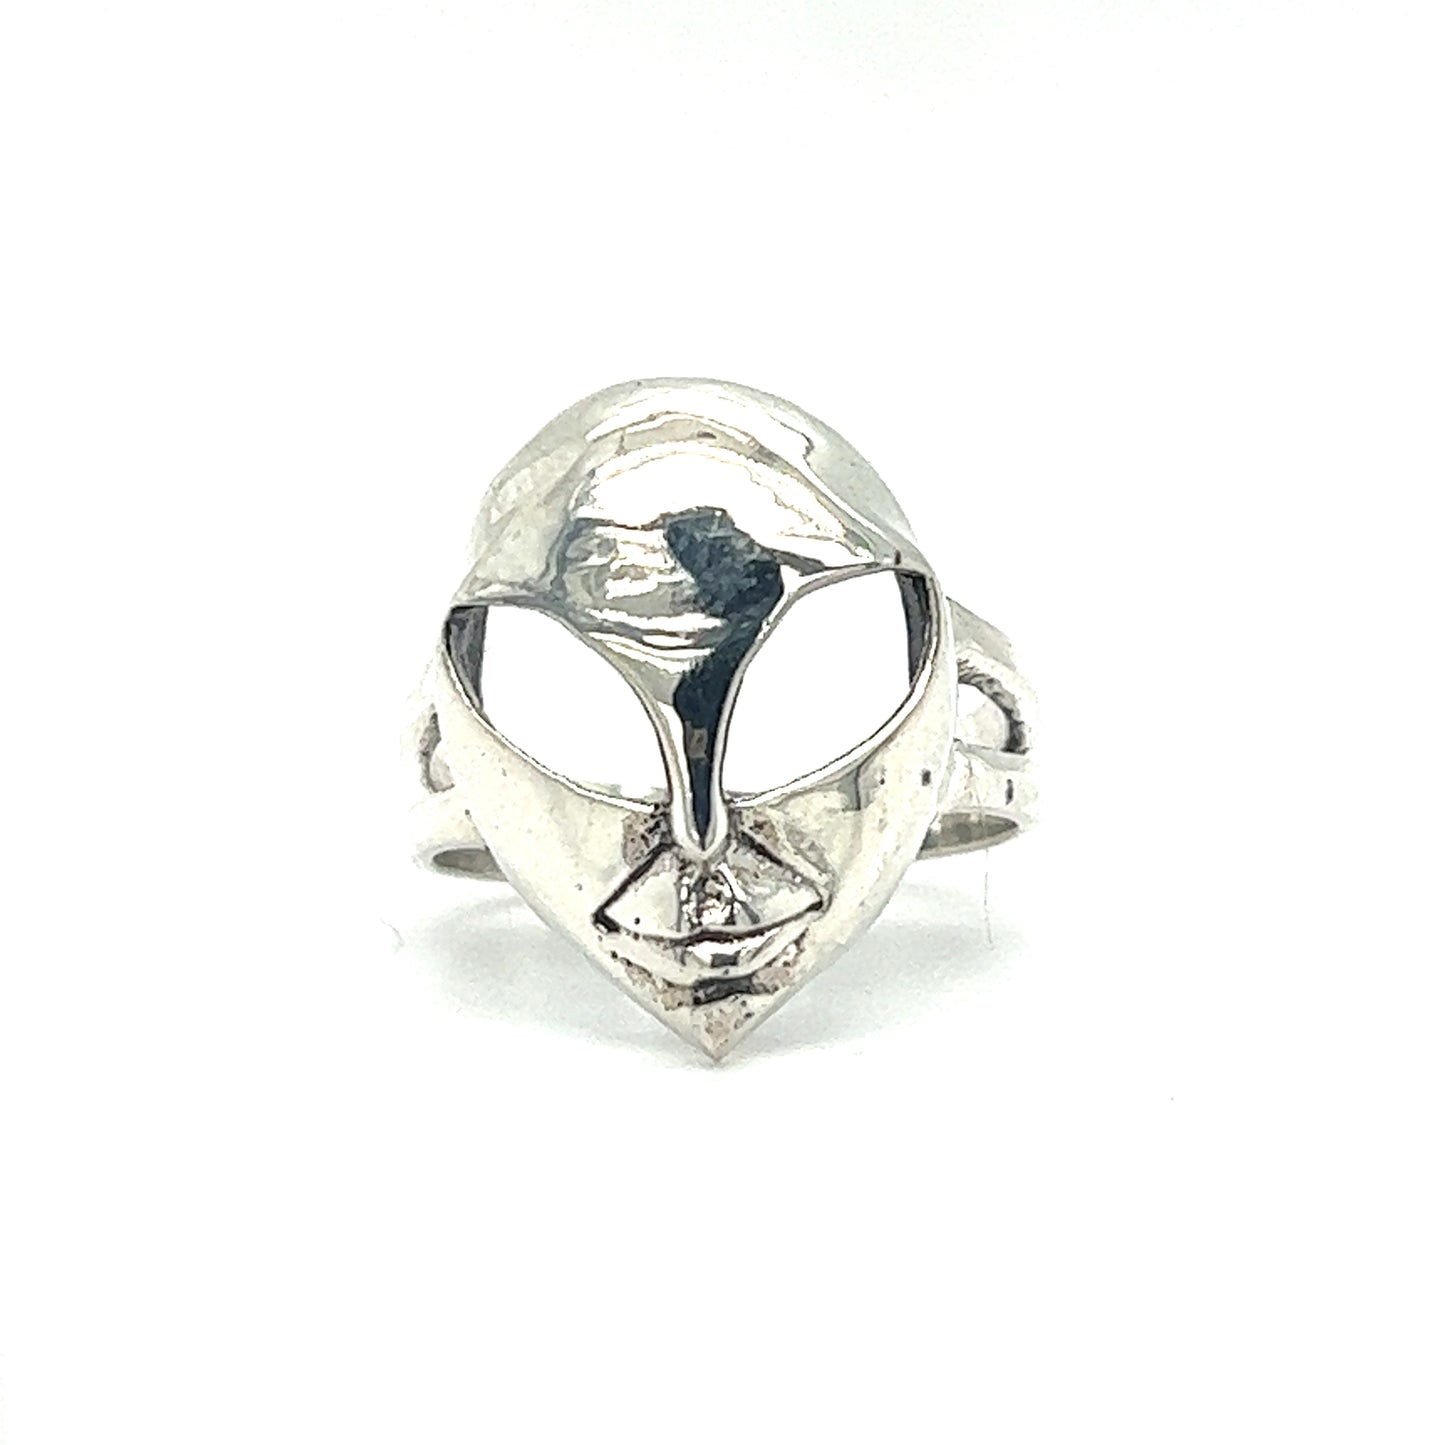 A Super Silver Alien Head Ring that serves as a fashion statement piece.